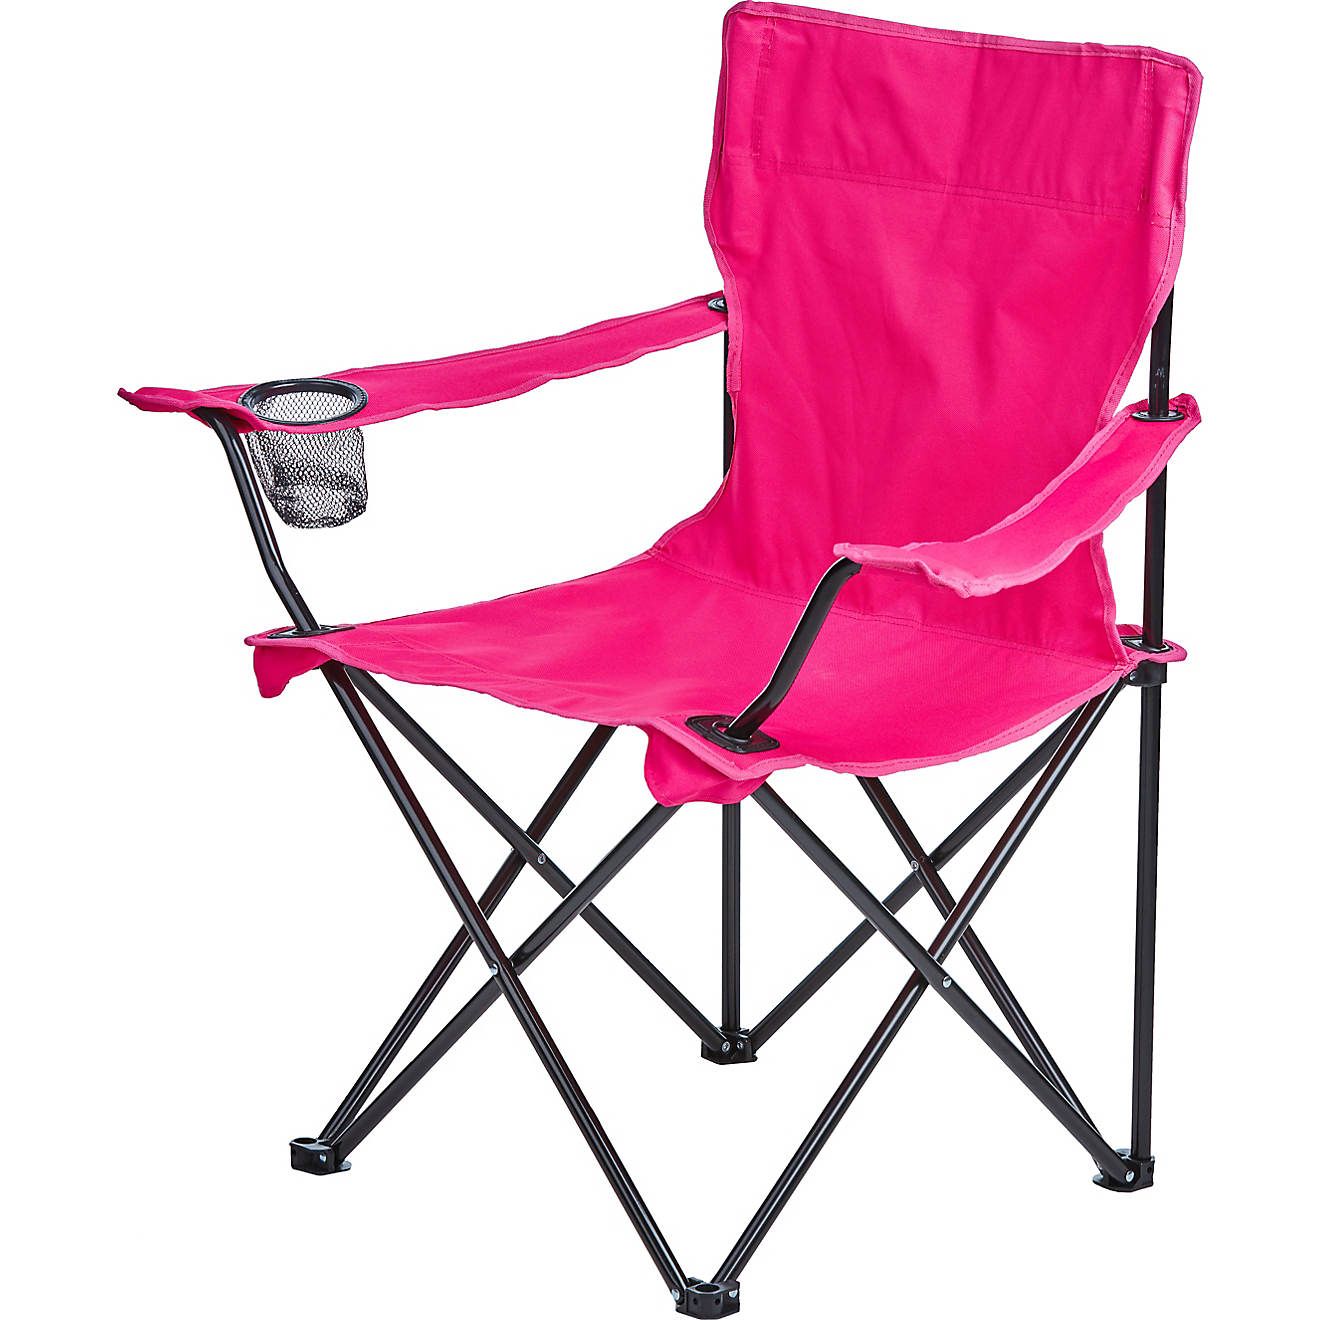 Academy Sports + Outdoors Logo Armchair | Academy Sports + Outdoor Affiliate